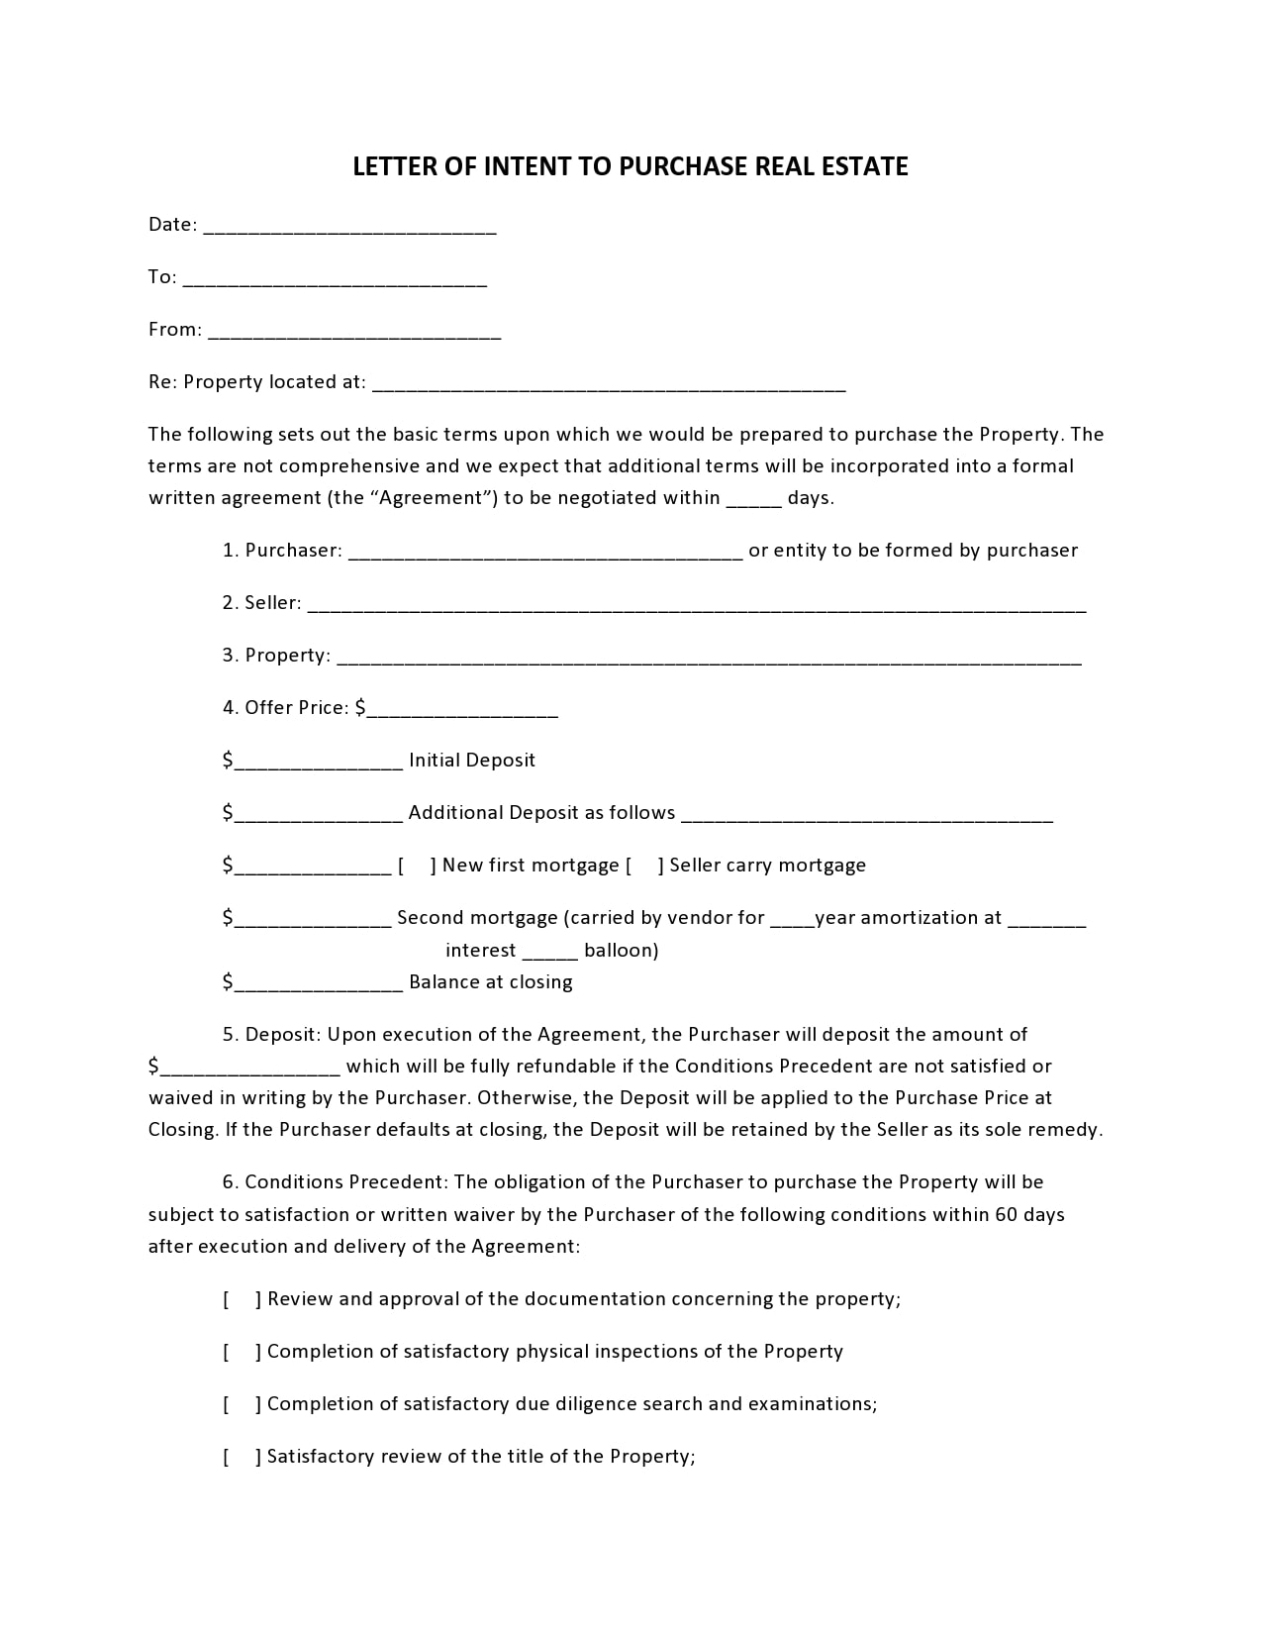 49 Free Letters Of Intent To Purchase (Real Estate/Business/Land) In Letter Of Intent For Real Estate Purchase Template